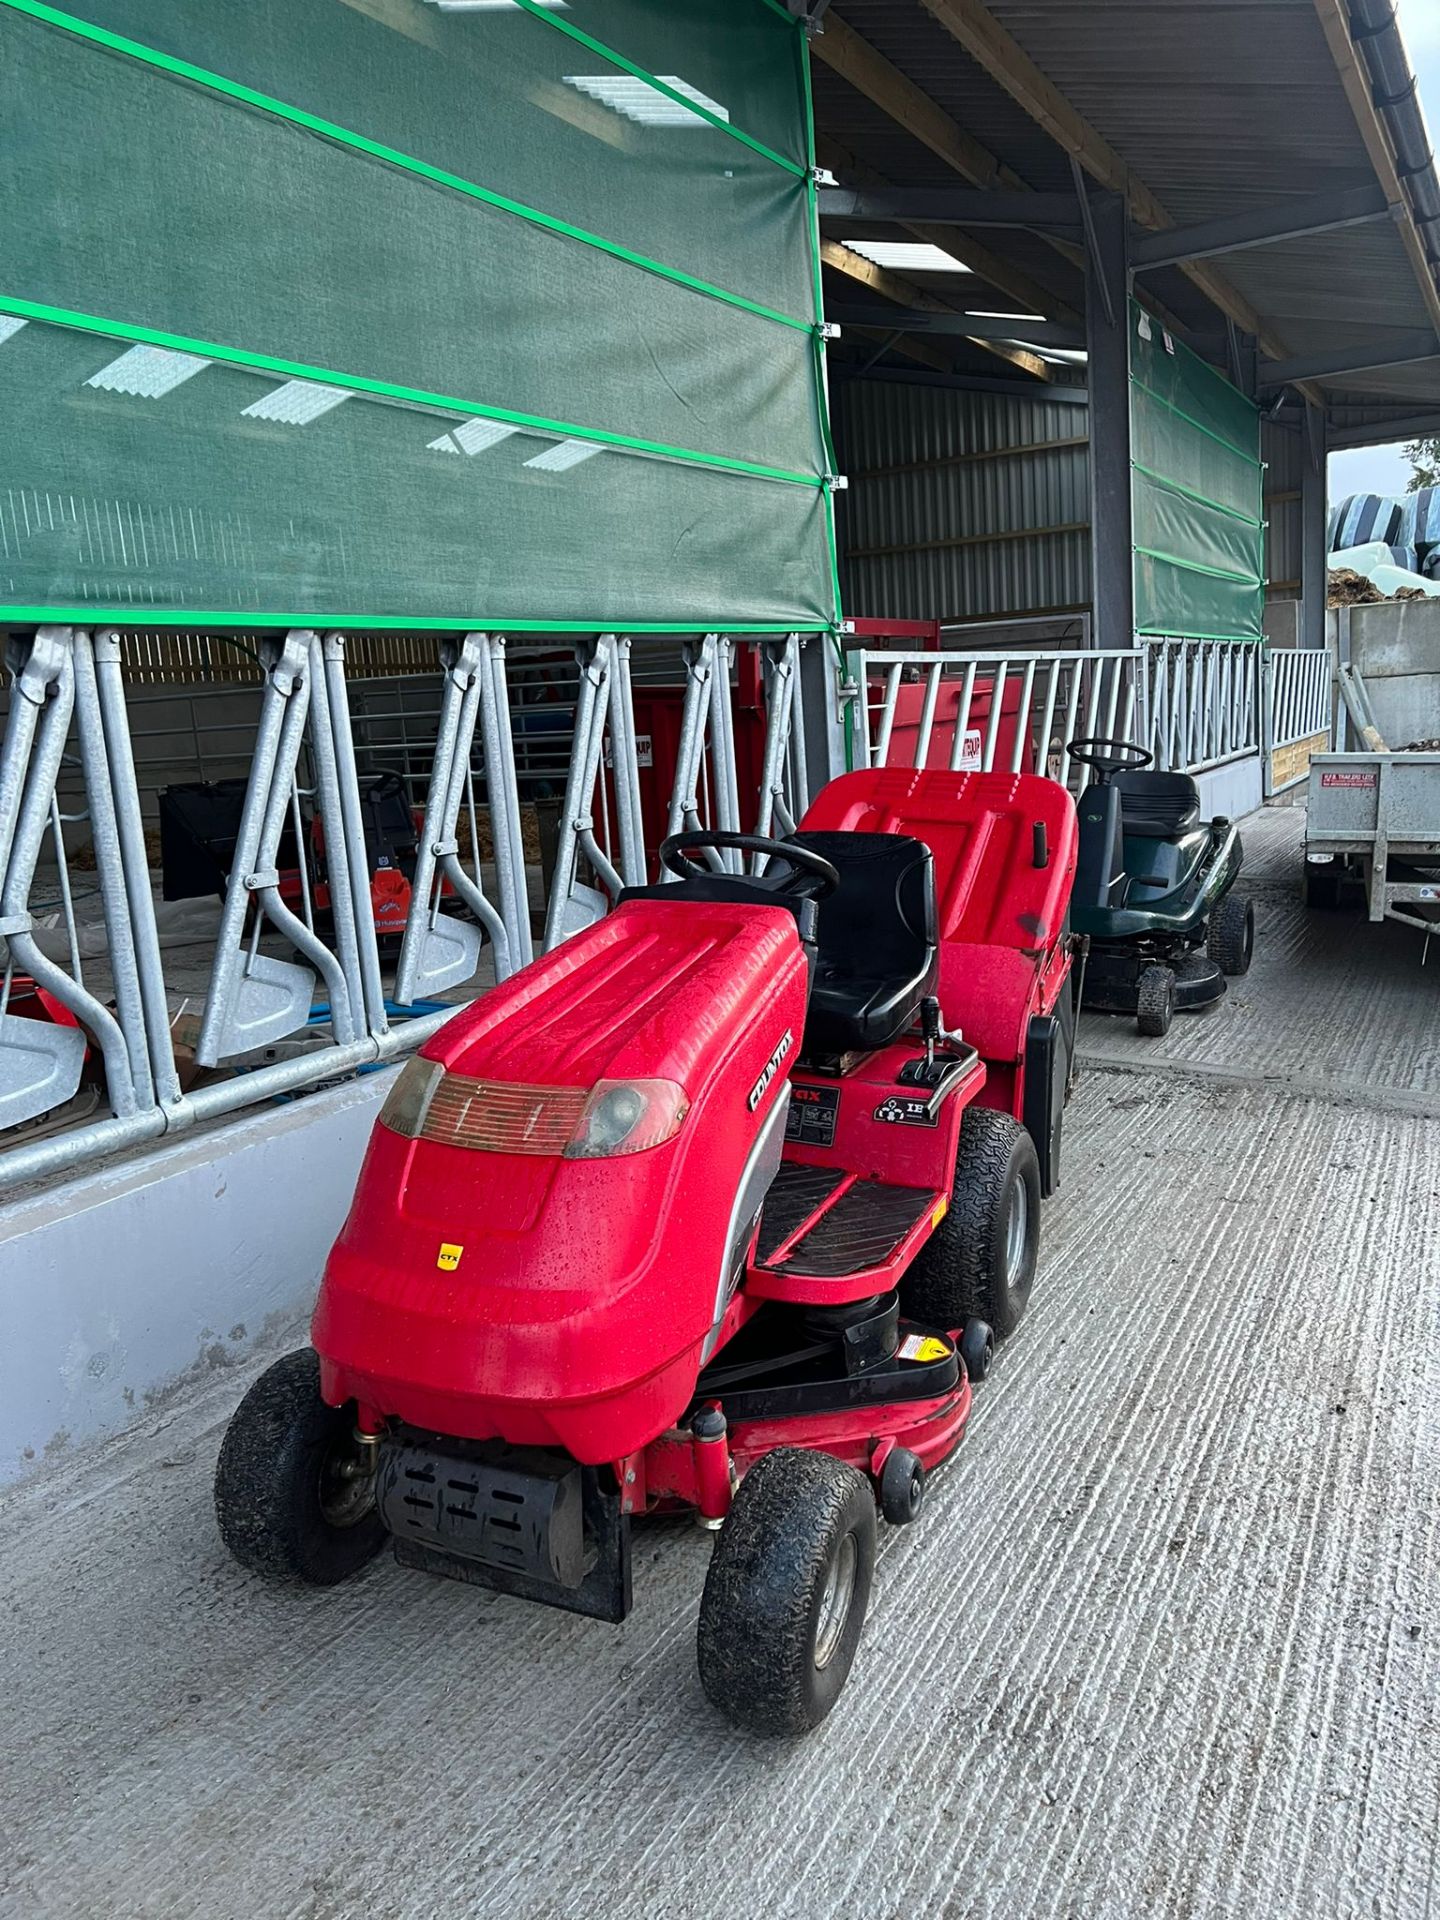 COUNTAX C300H RIDE ON LAWN MOWER, RUNS WORKS AND CUTS WELL, 13hP HONDA ENGINE *PLUS VAT* - Image 2 of 5